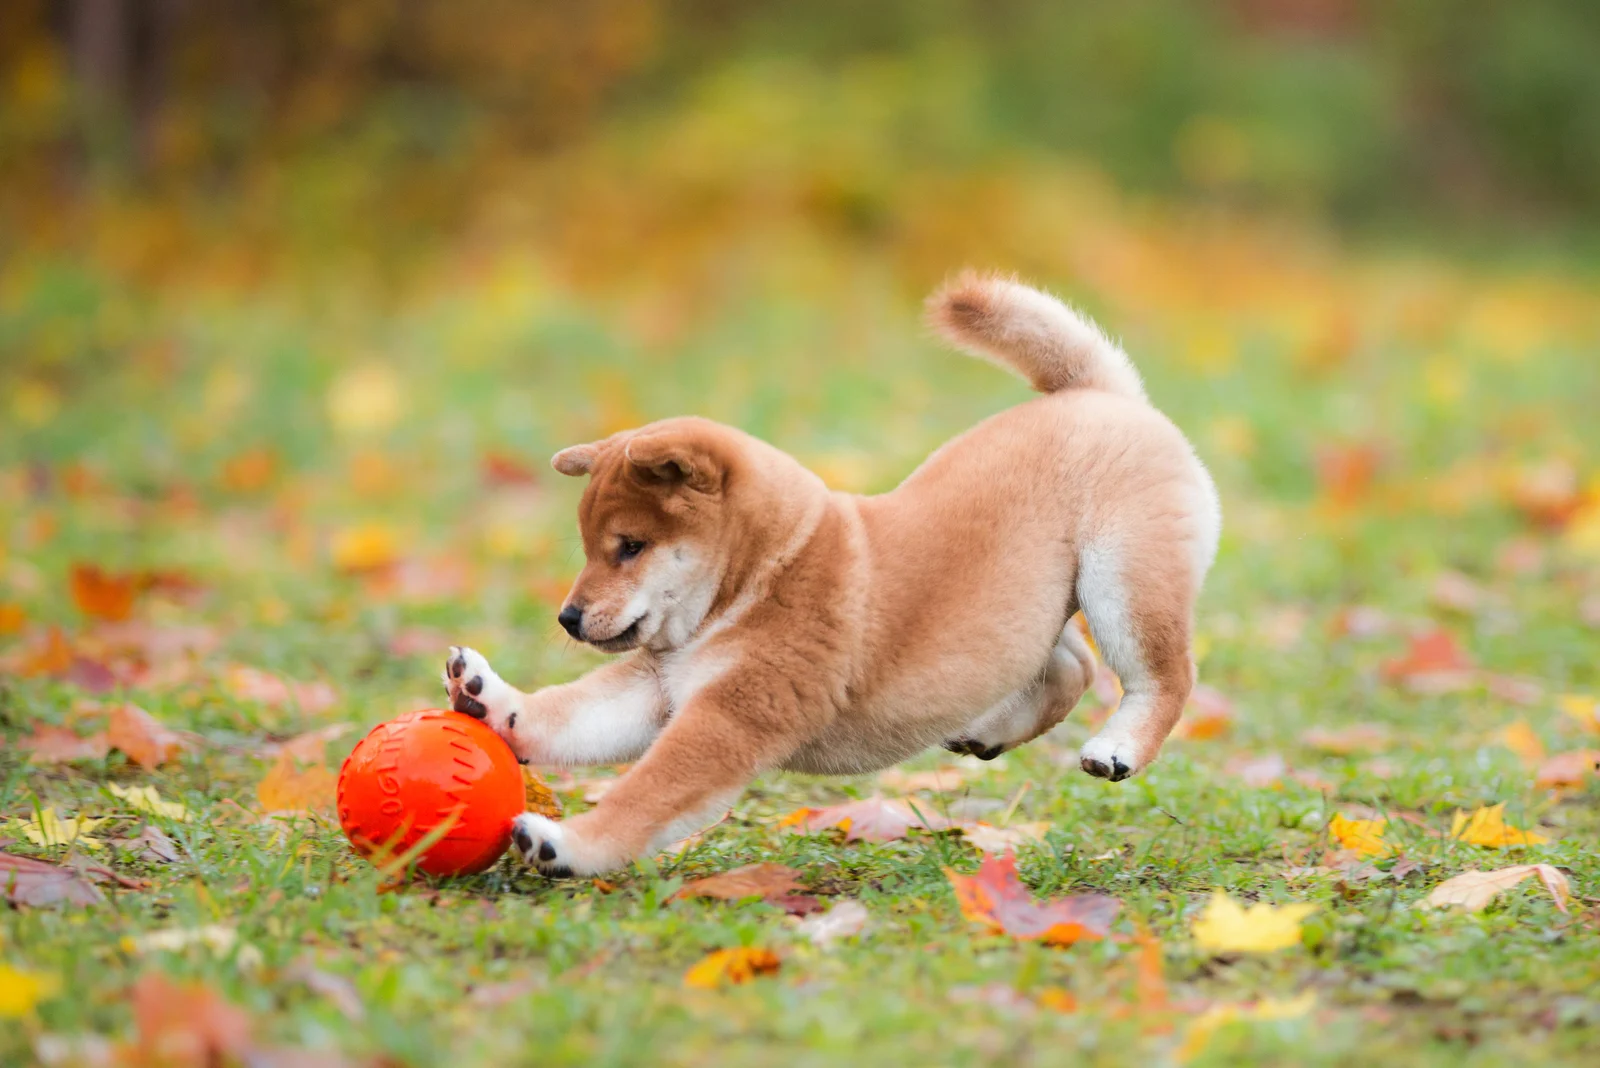 Shiba Inu plays with a ball in the garden